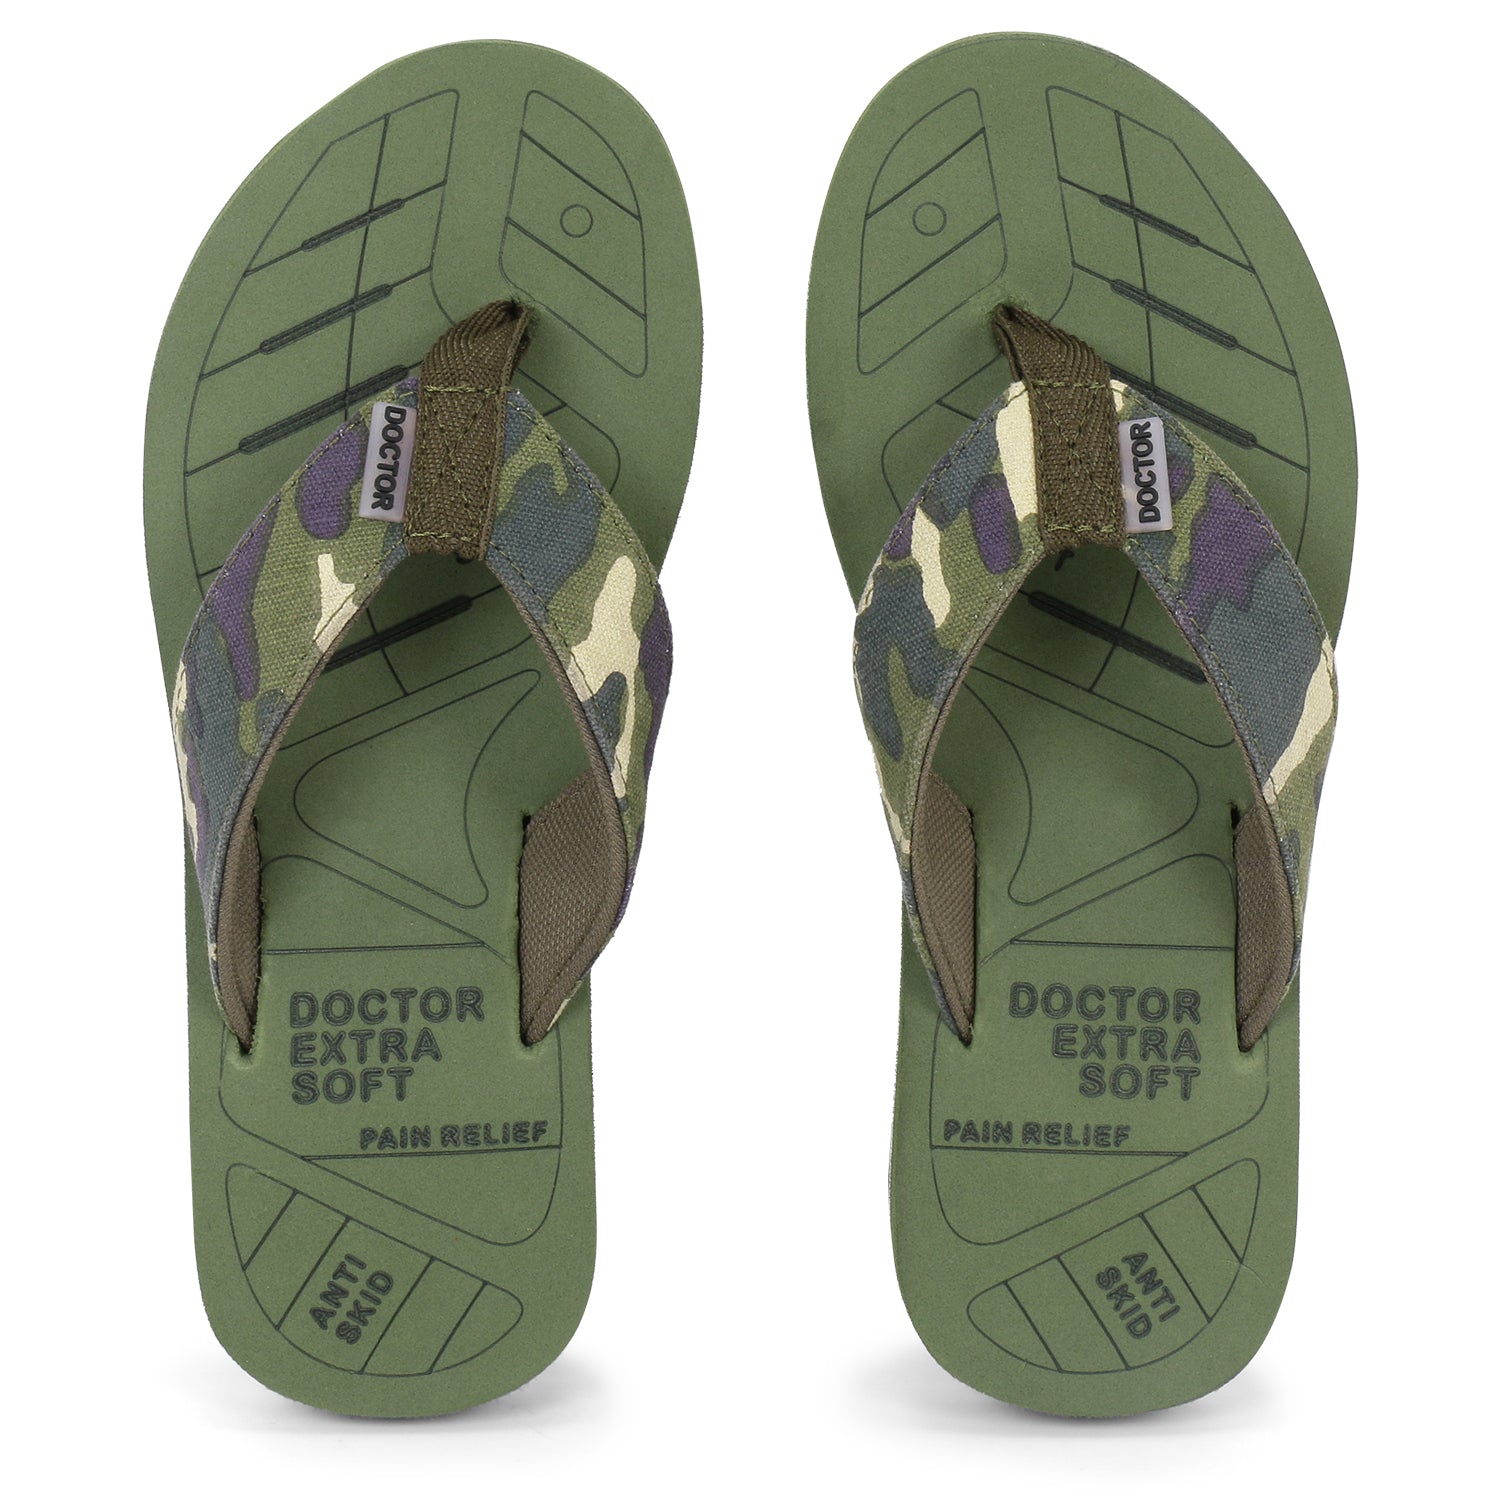 Buy SOFT womens Orthopedic and Diabetic Adjustable Strap Comfort Dr Sliders  and House Slippers mFlipflops womens Slides Online In India At Discounted  Prices